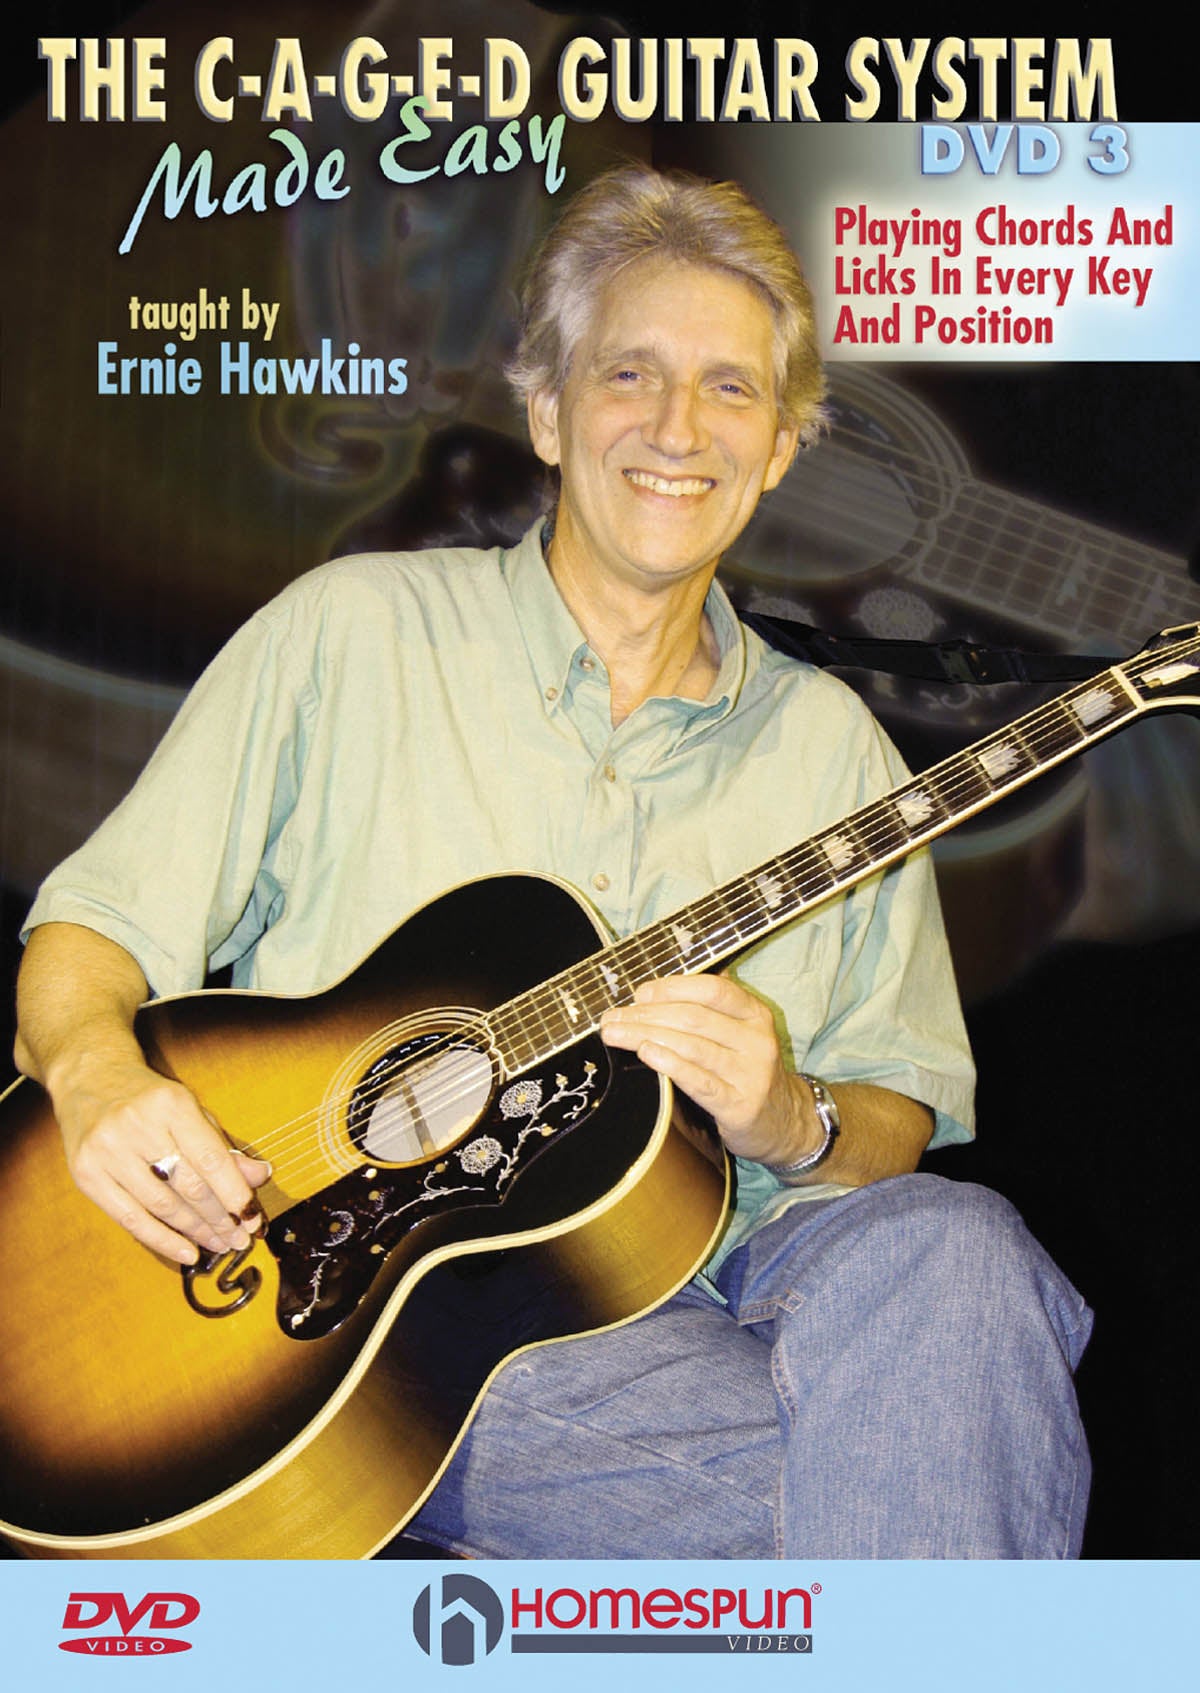 Image 1 of DVD-The CAGED Guitar System Made Easy: Vol. 3 - Exploring Blues and Ragtime Progressions - SKU# 300-DVD325 : Product Type Media : Elderly Instruments